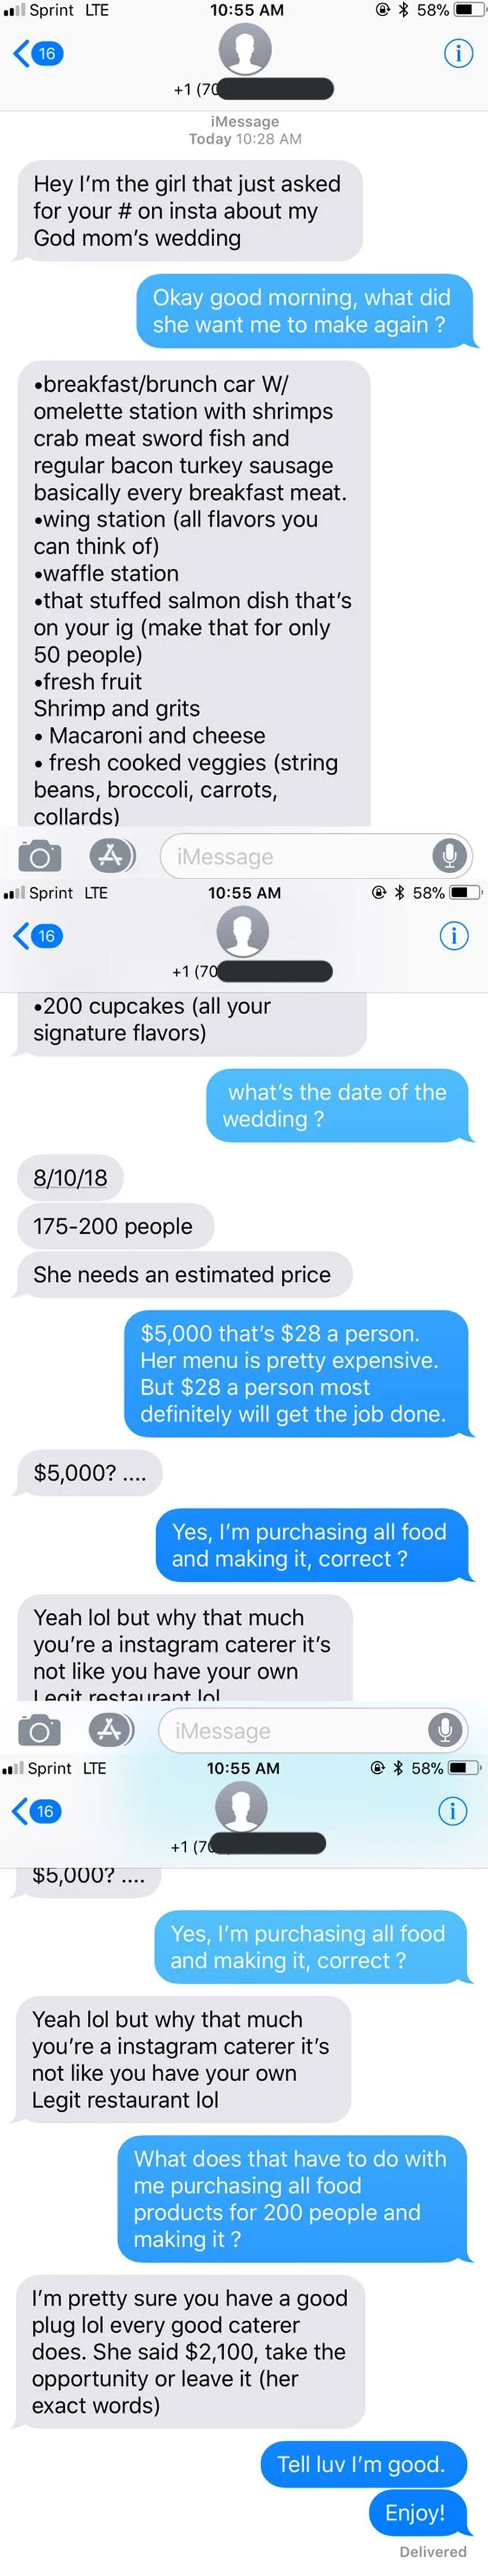 This Gem From 2018 | Severely Lowballing A Wedding Caterer